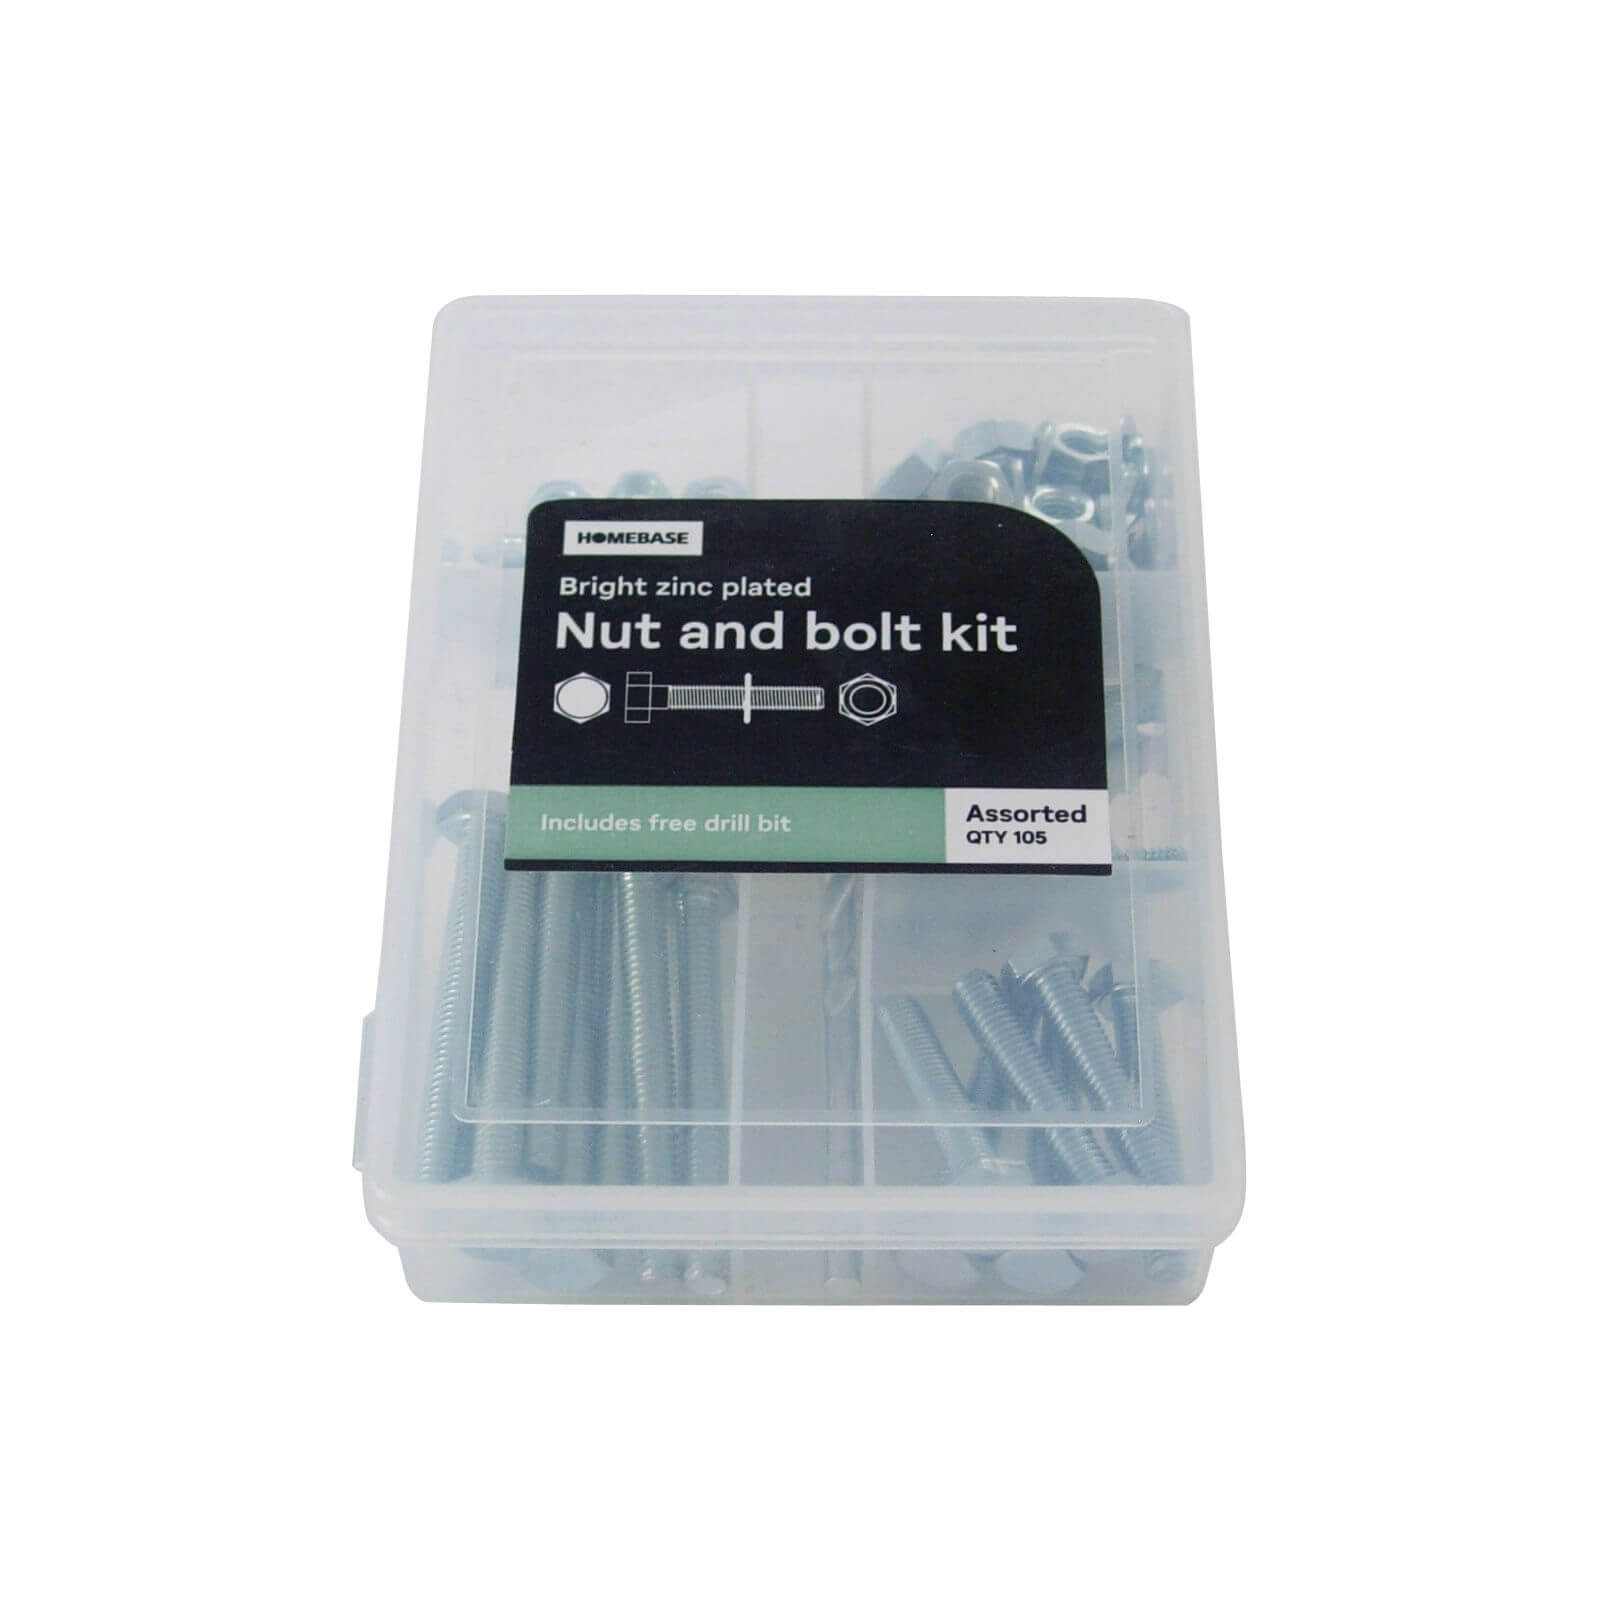 Nut and Bolt Kit With Drill Bit - Assorted - 105 Pack